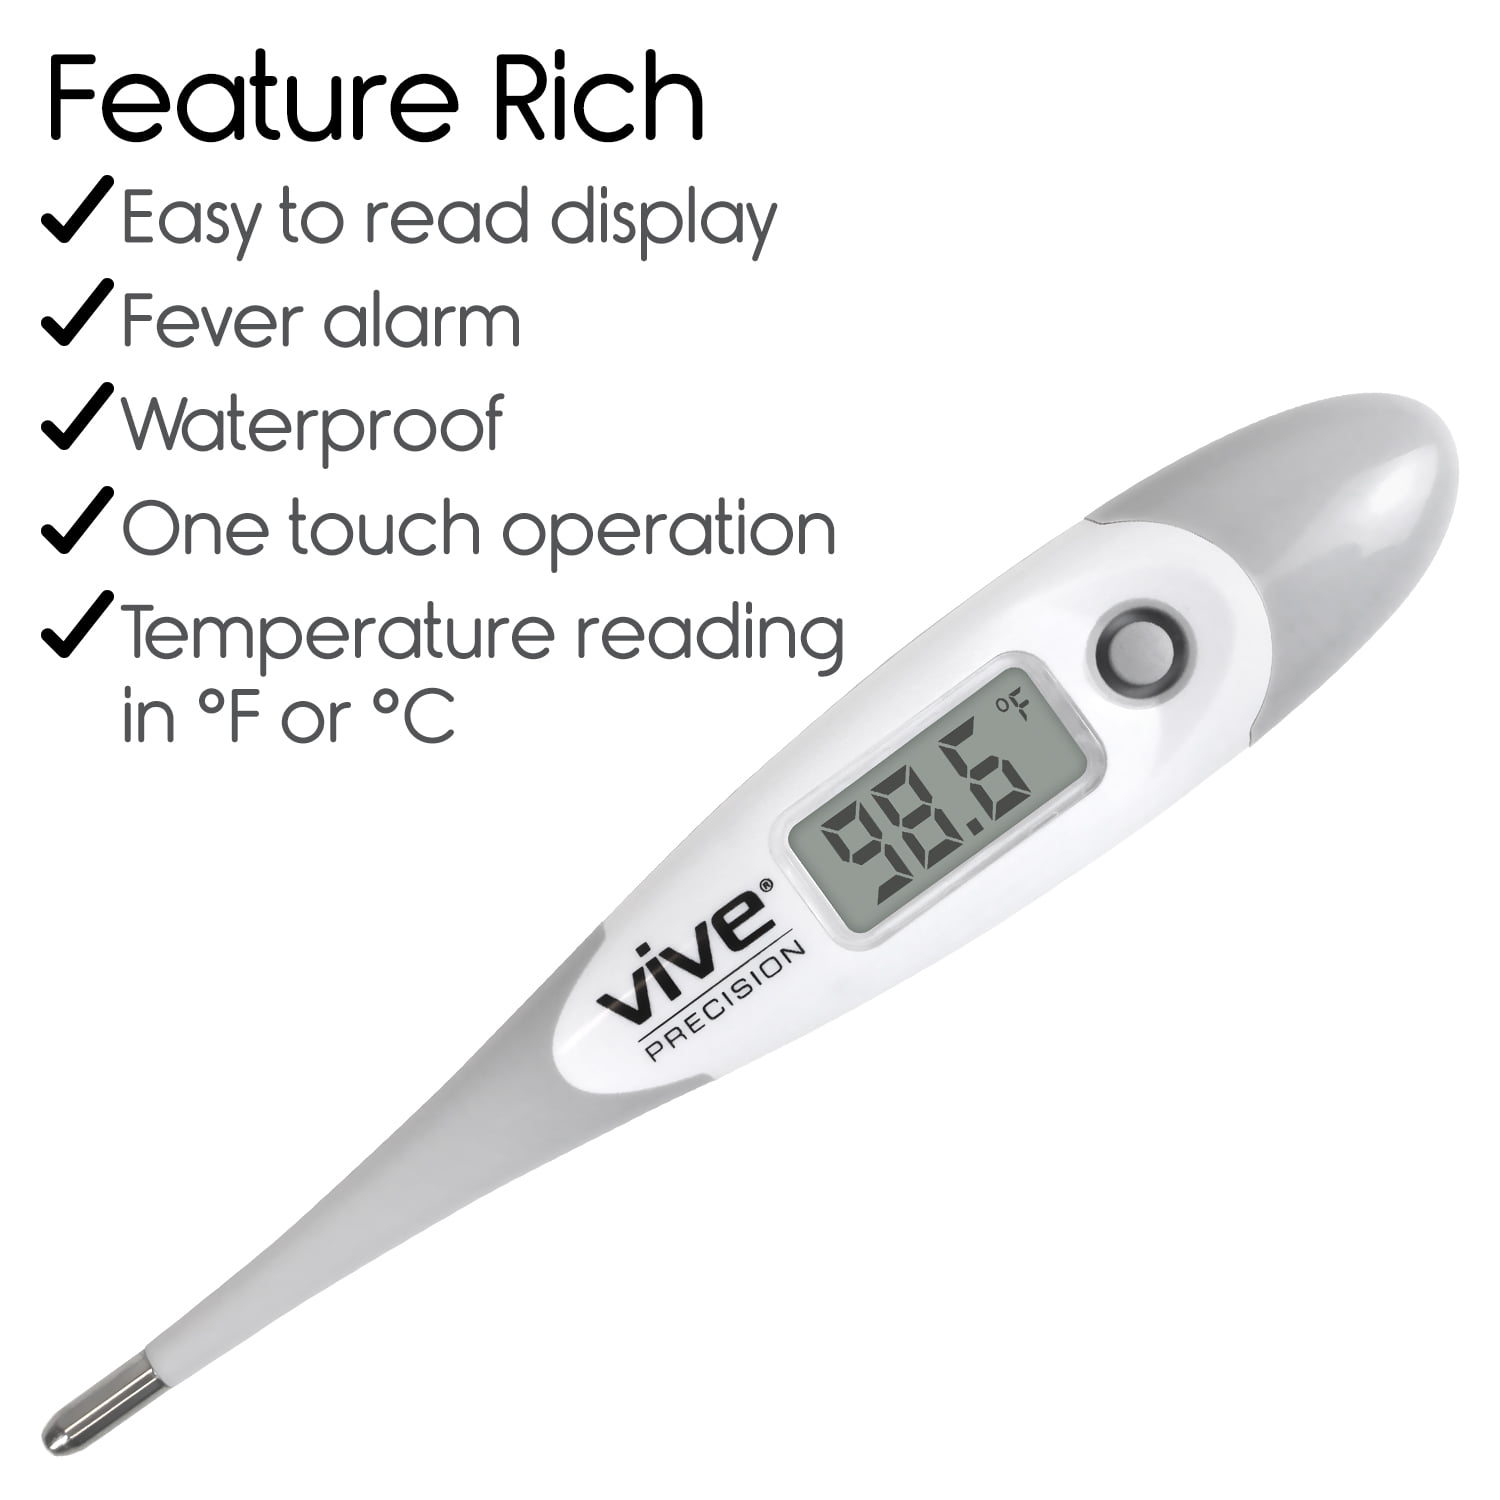 Waterproof Underarm Thermometer with Beeper and Memory Accurate Read & Monitor Fever Temperature in Quick 20 Seconds by Oral Rectal & Axillary Jinxuny Digital Body Thermometer 